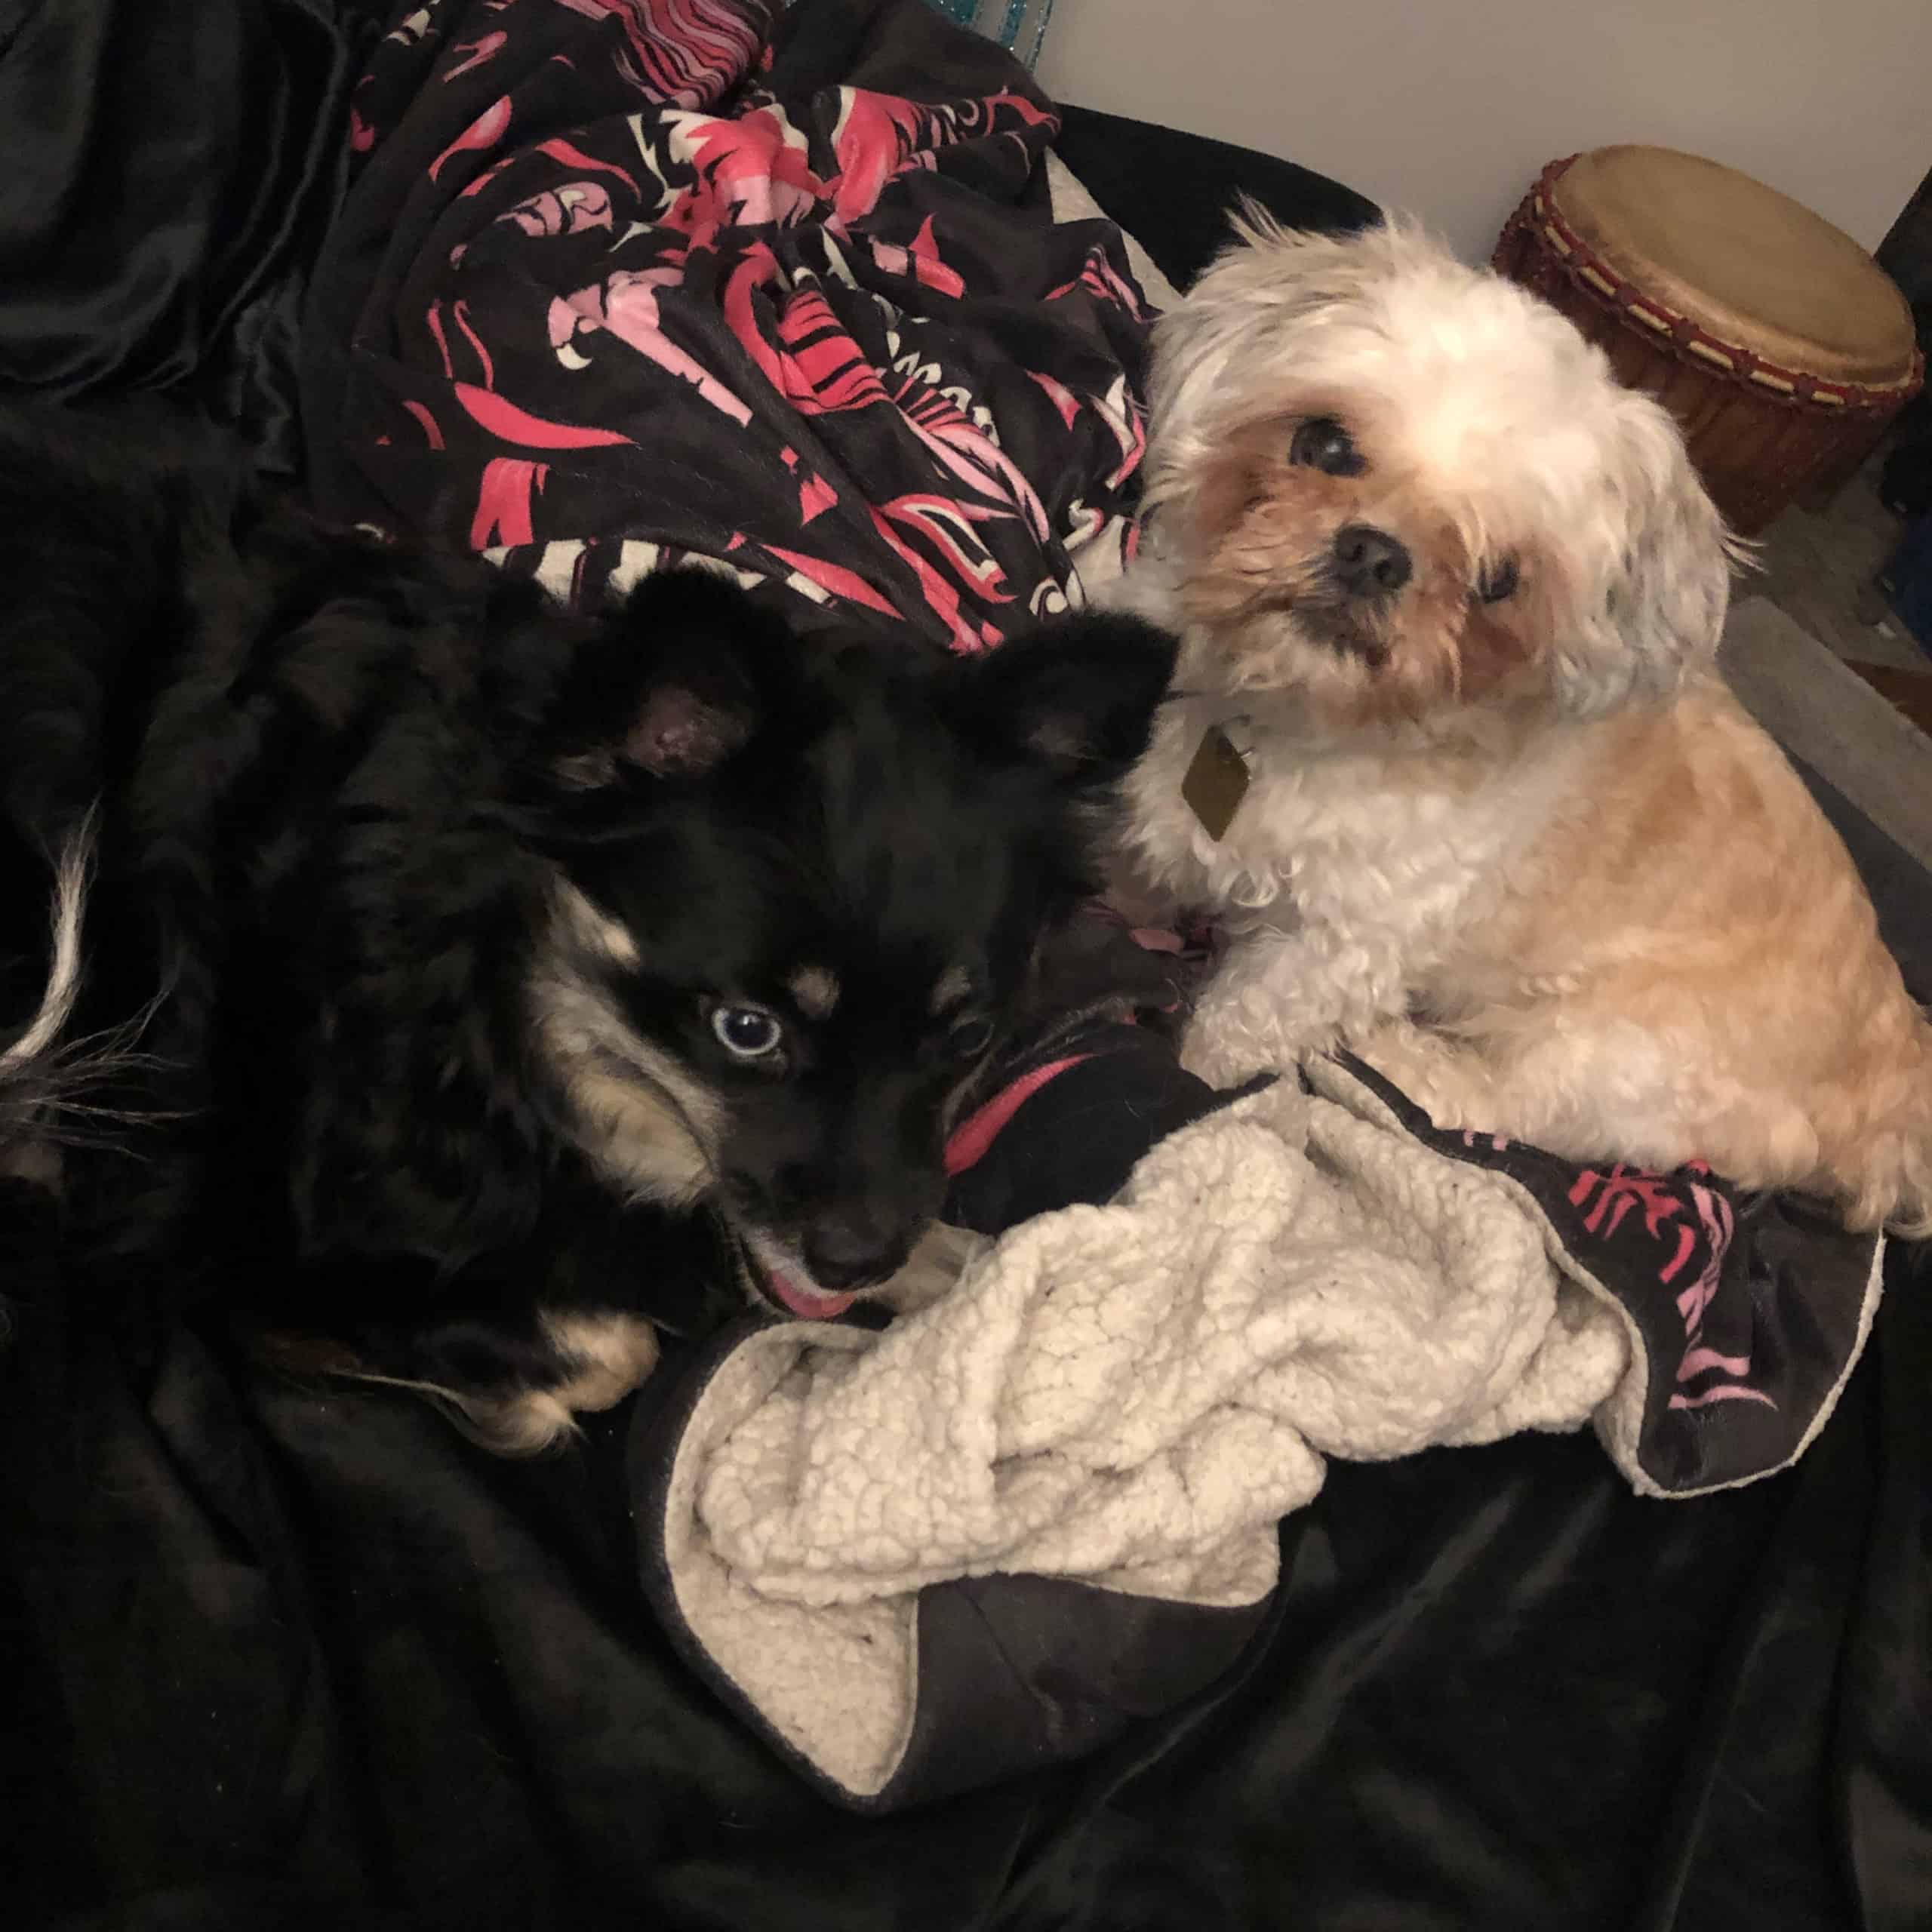 Image of my two dogs curled up with blankets.